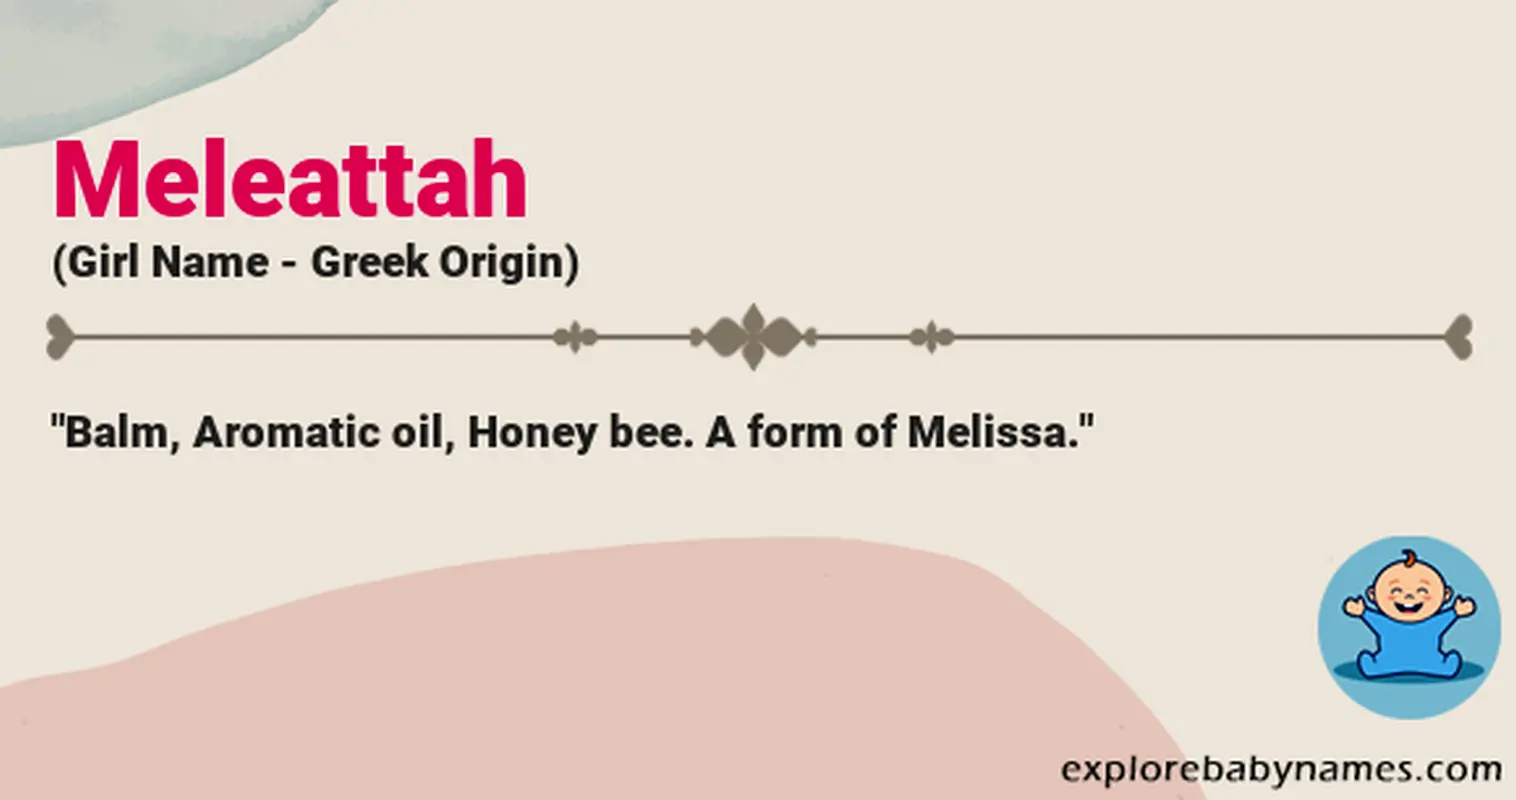 Meaning of Meleattah